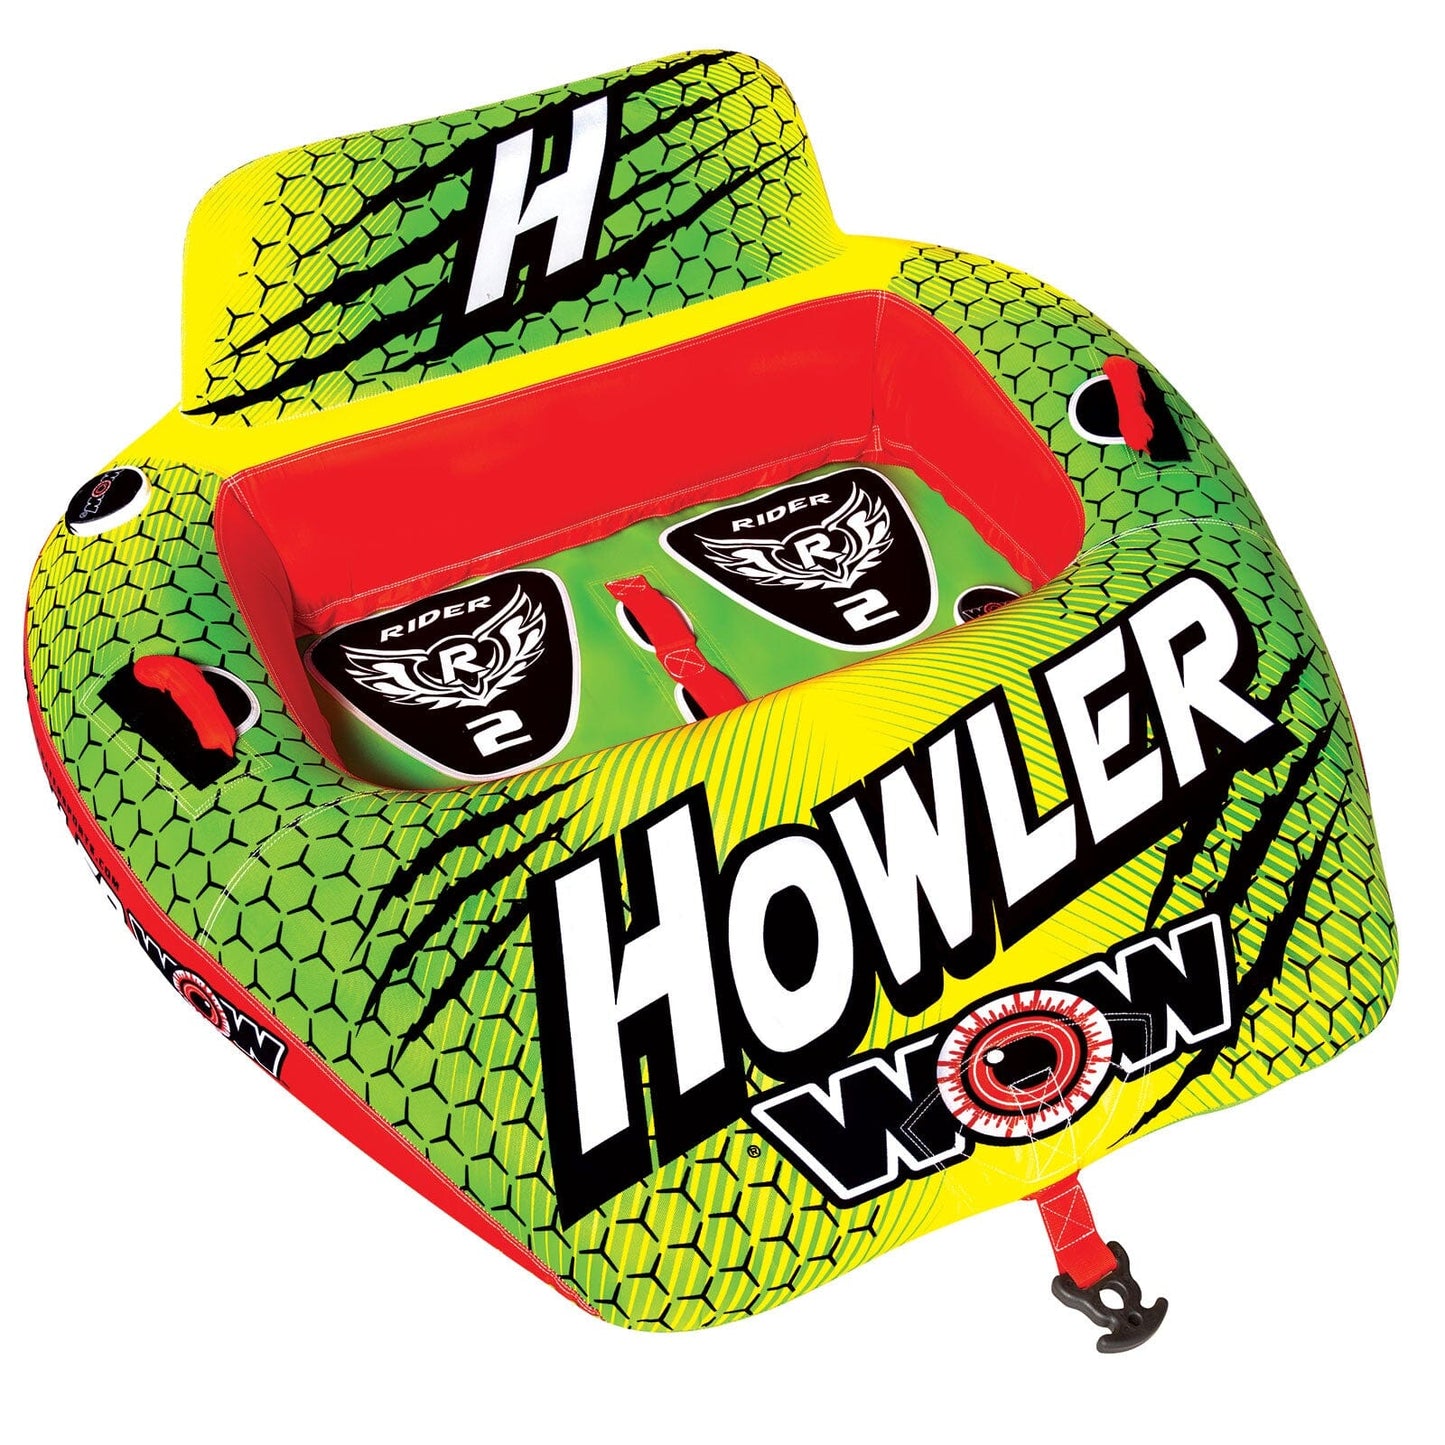 Howler 2 Person Towable